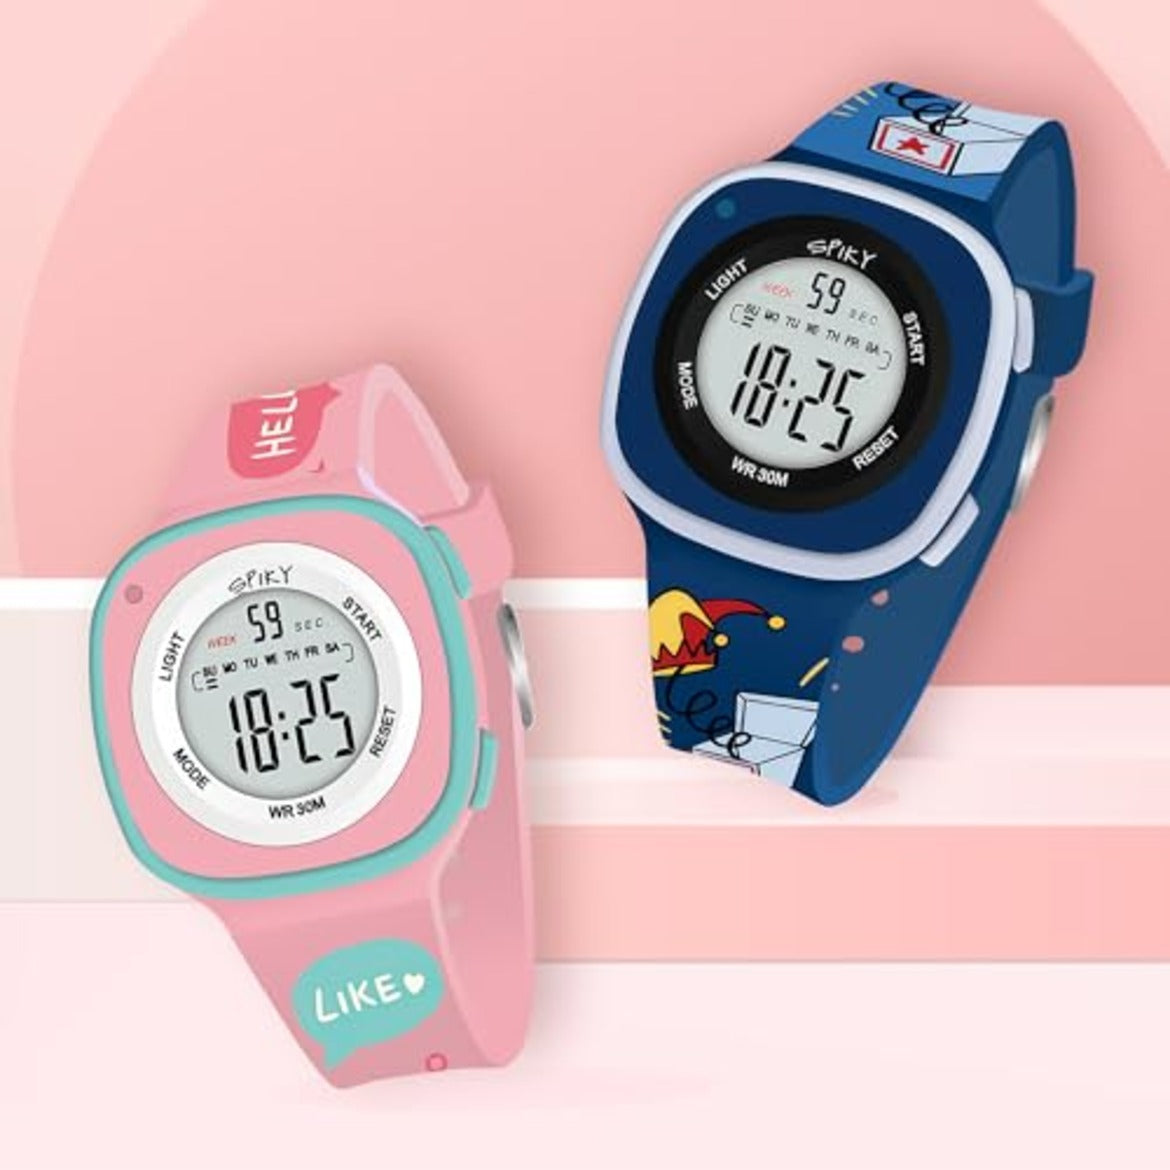 Spiky Square Digital Kids Sports Watches Combo - Pink & Blue